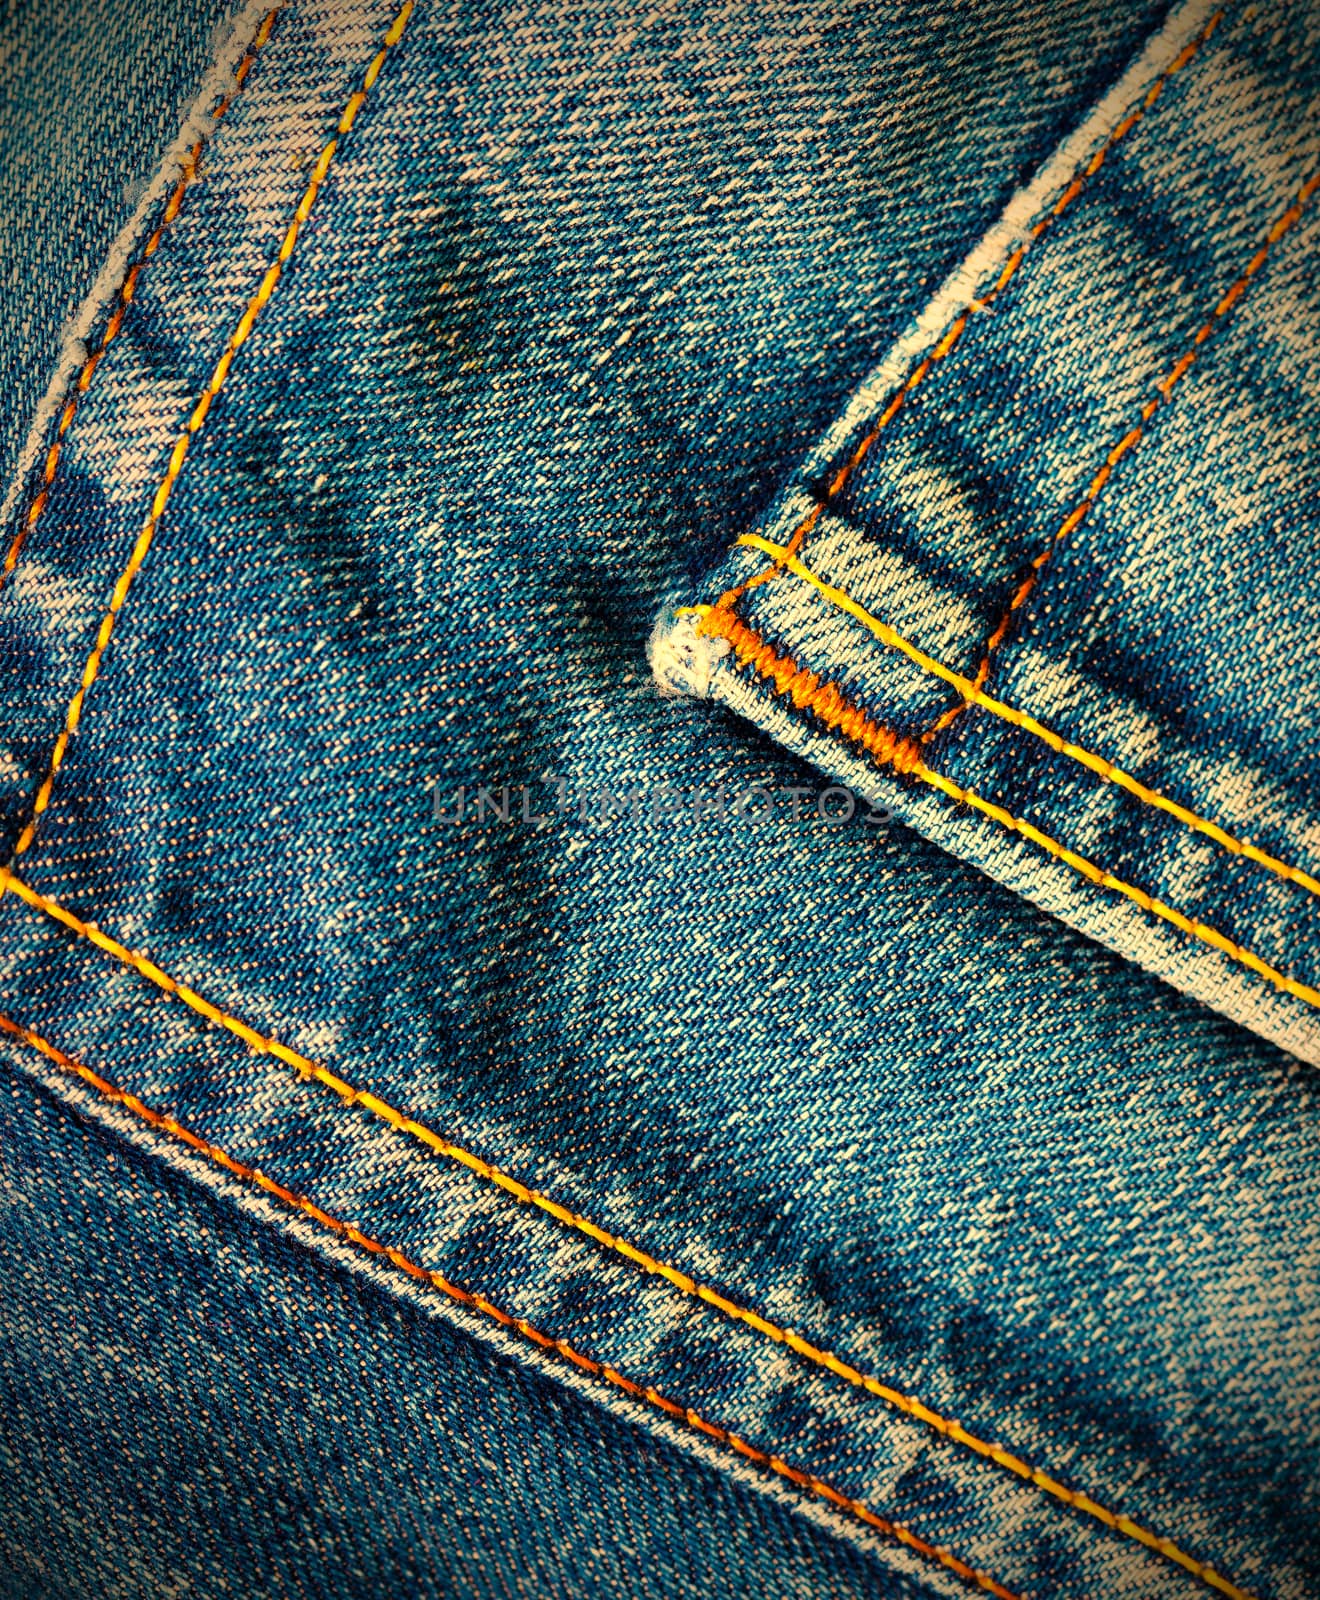 seams of jeans by Astroid